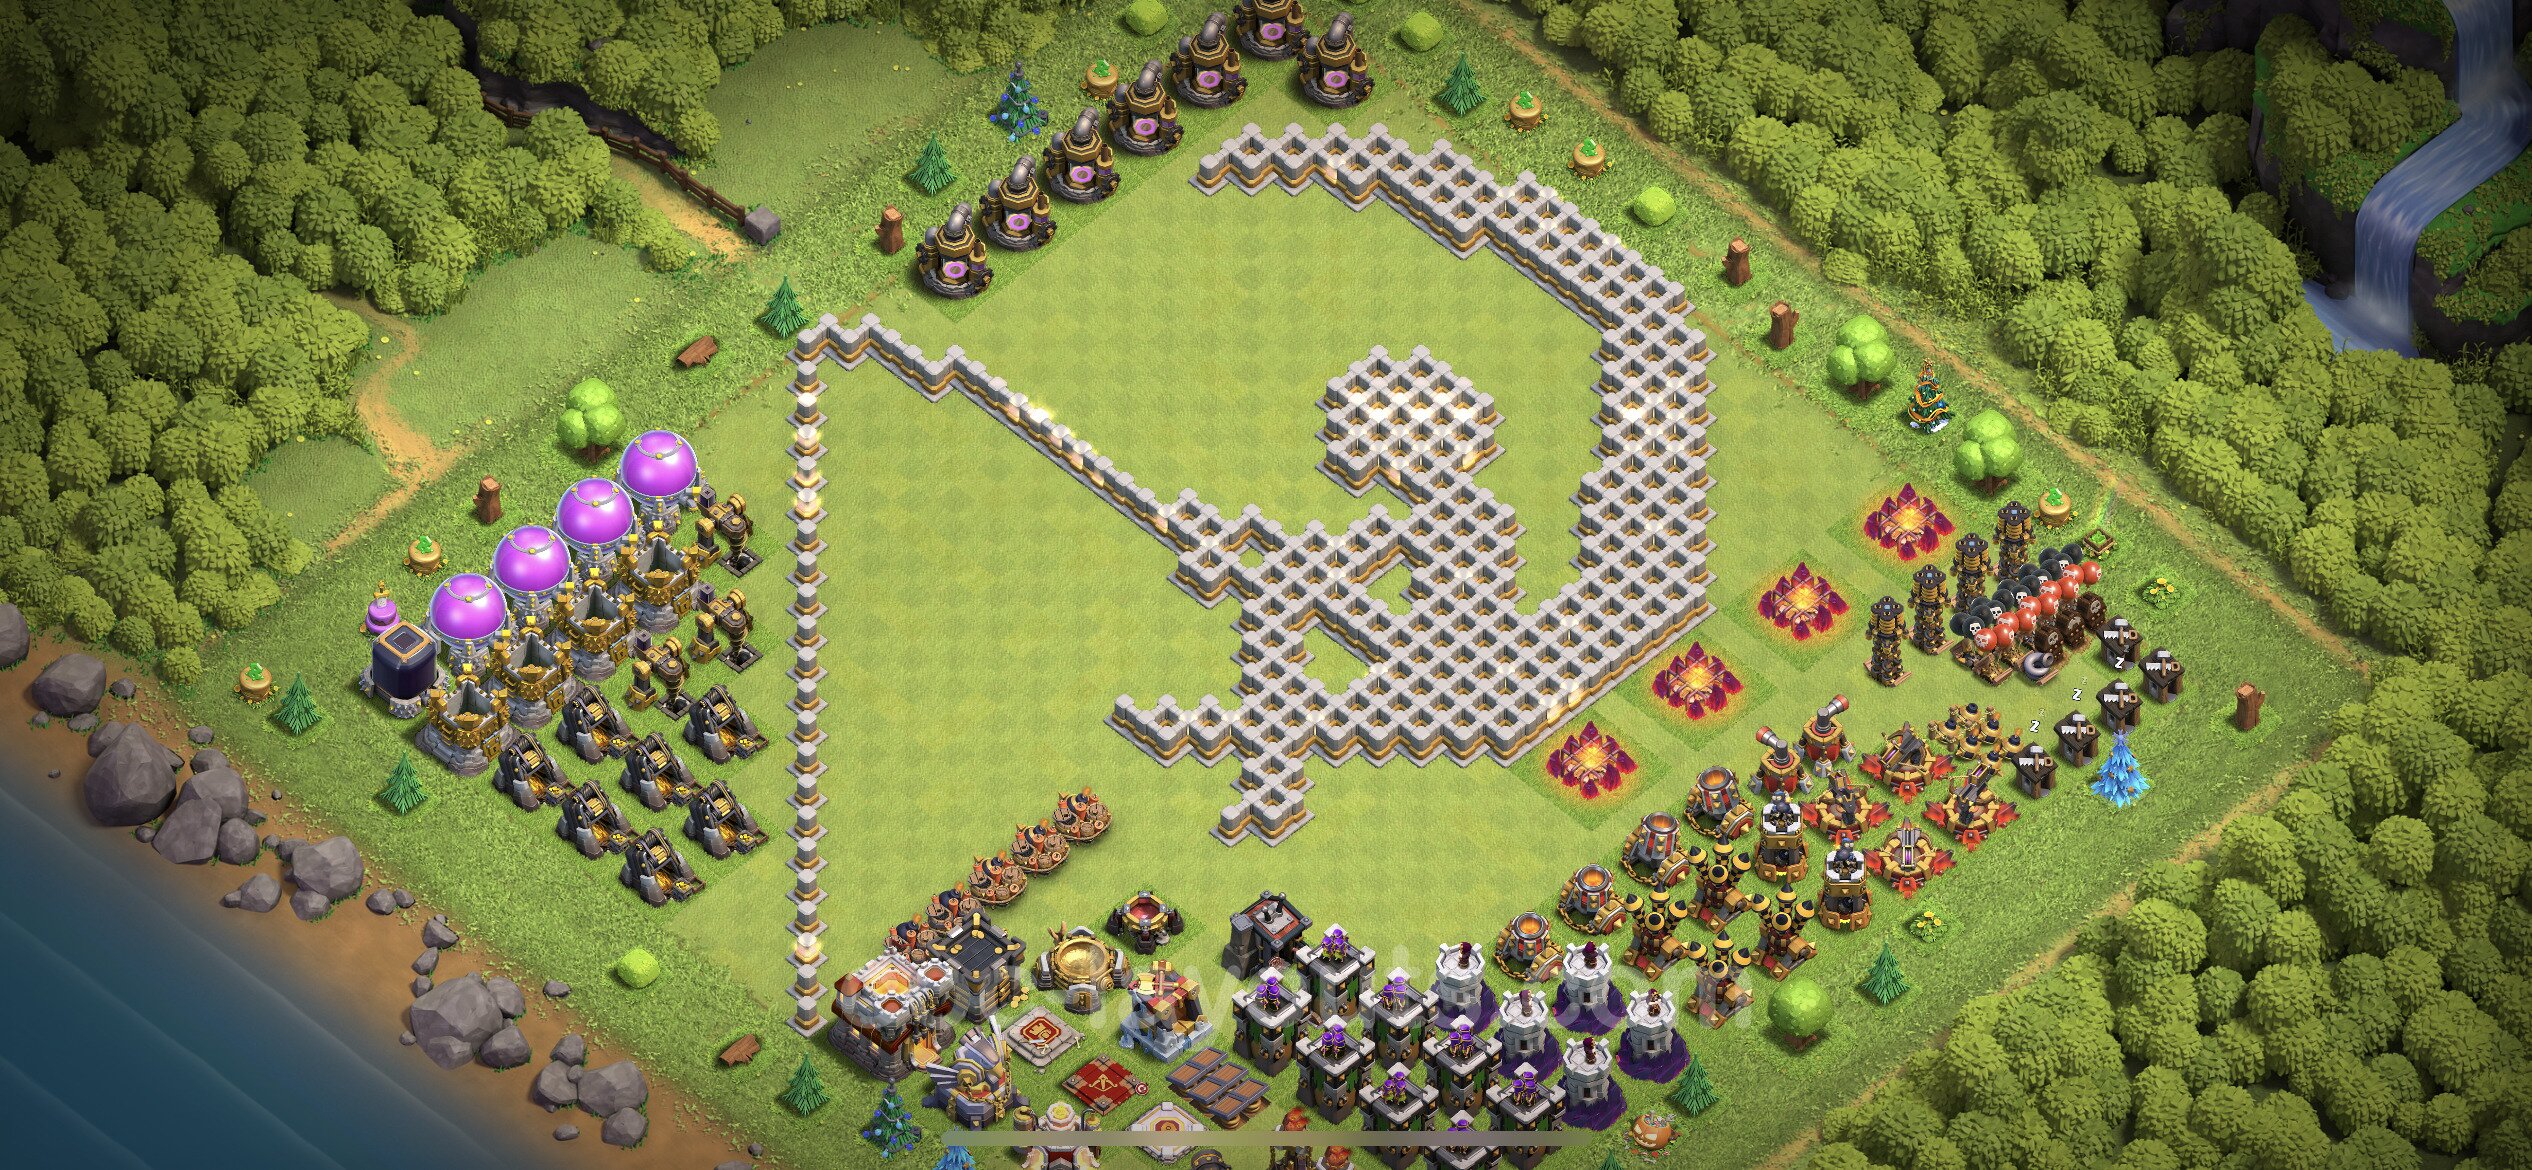 Best Funny Troll Base TH11 with Link - Town Hall Level 11 Art Base Copy -  (#1)